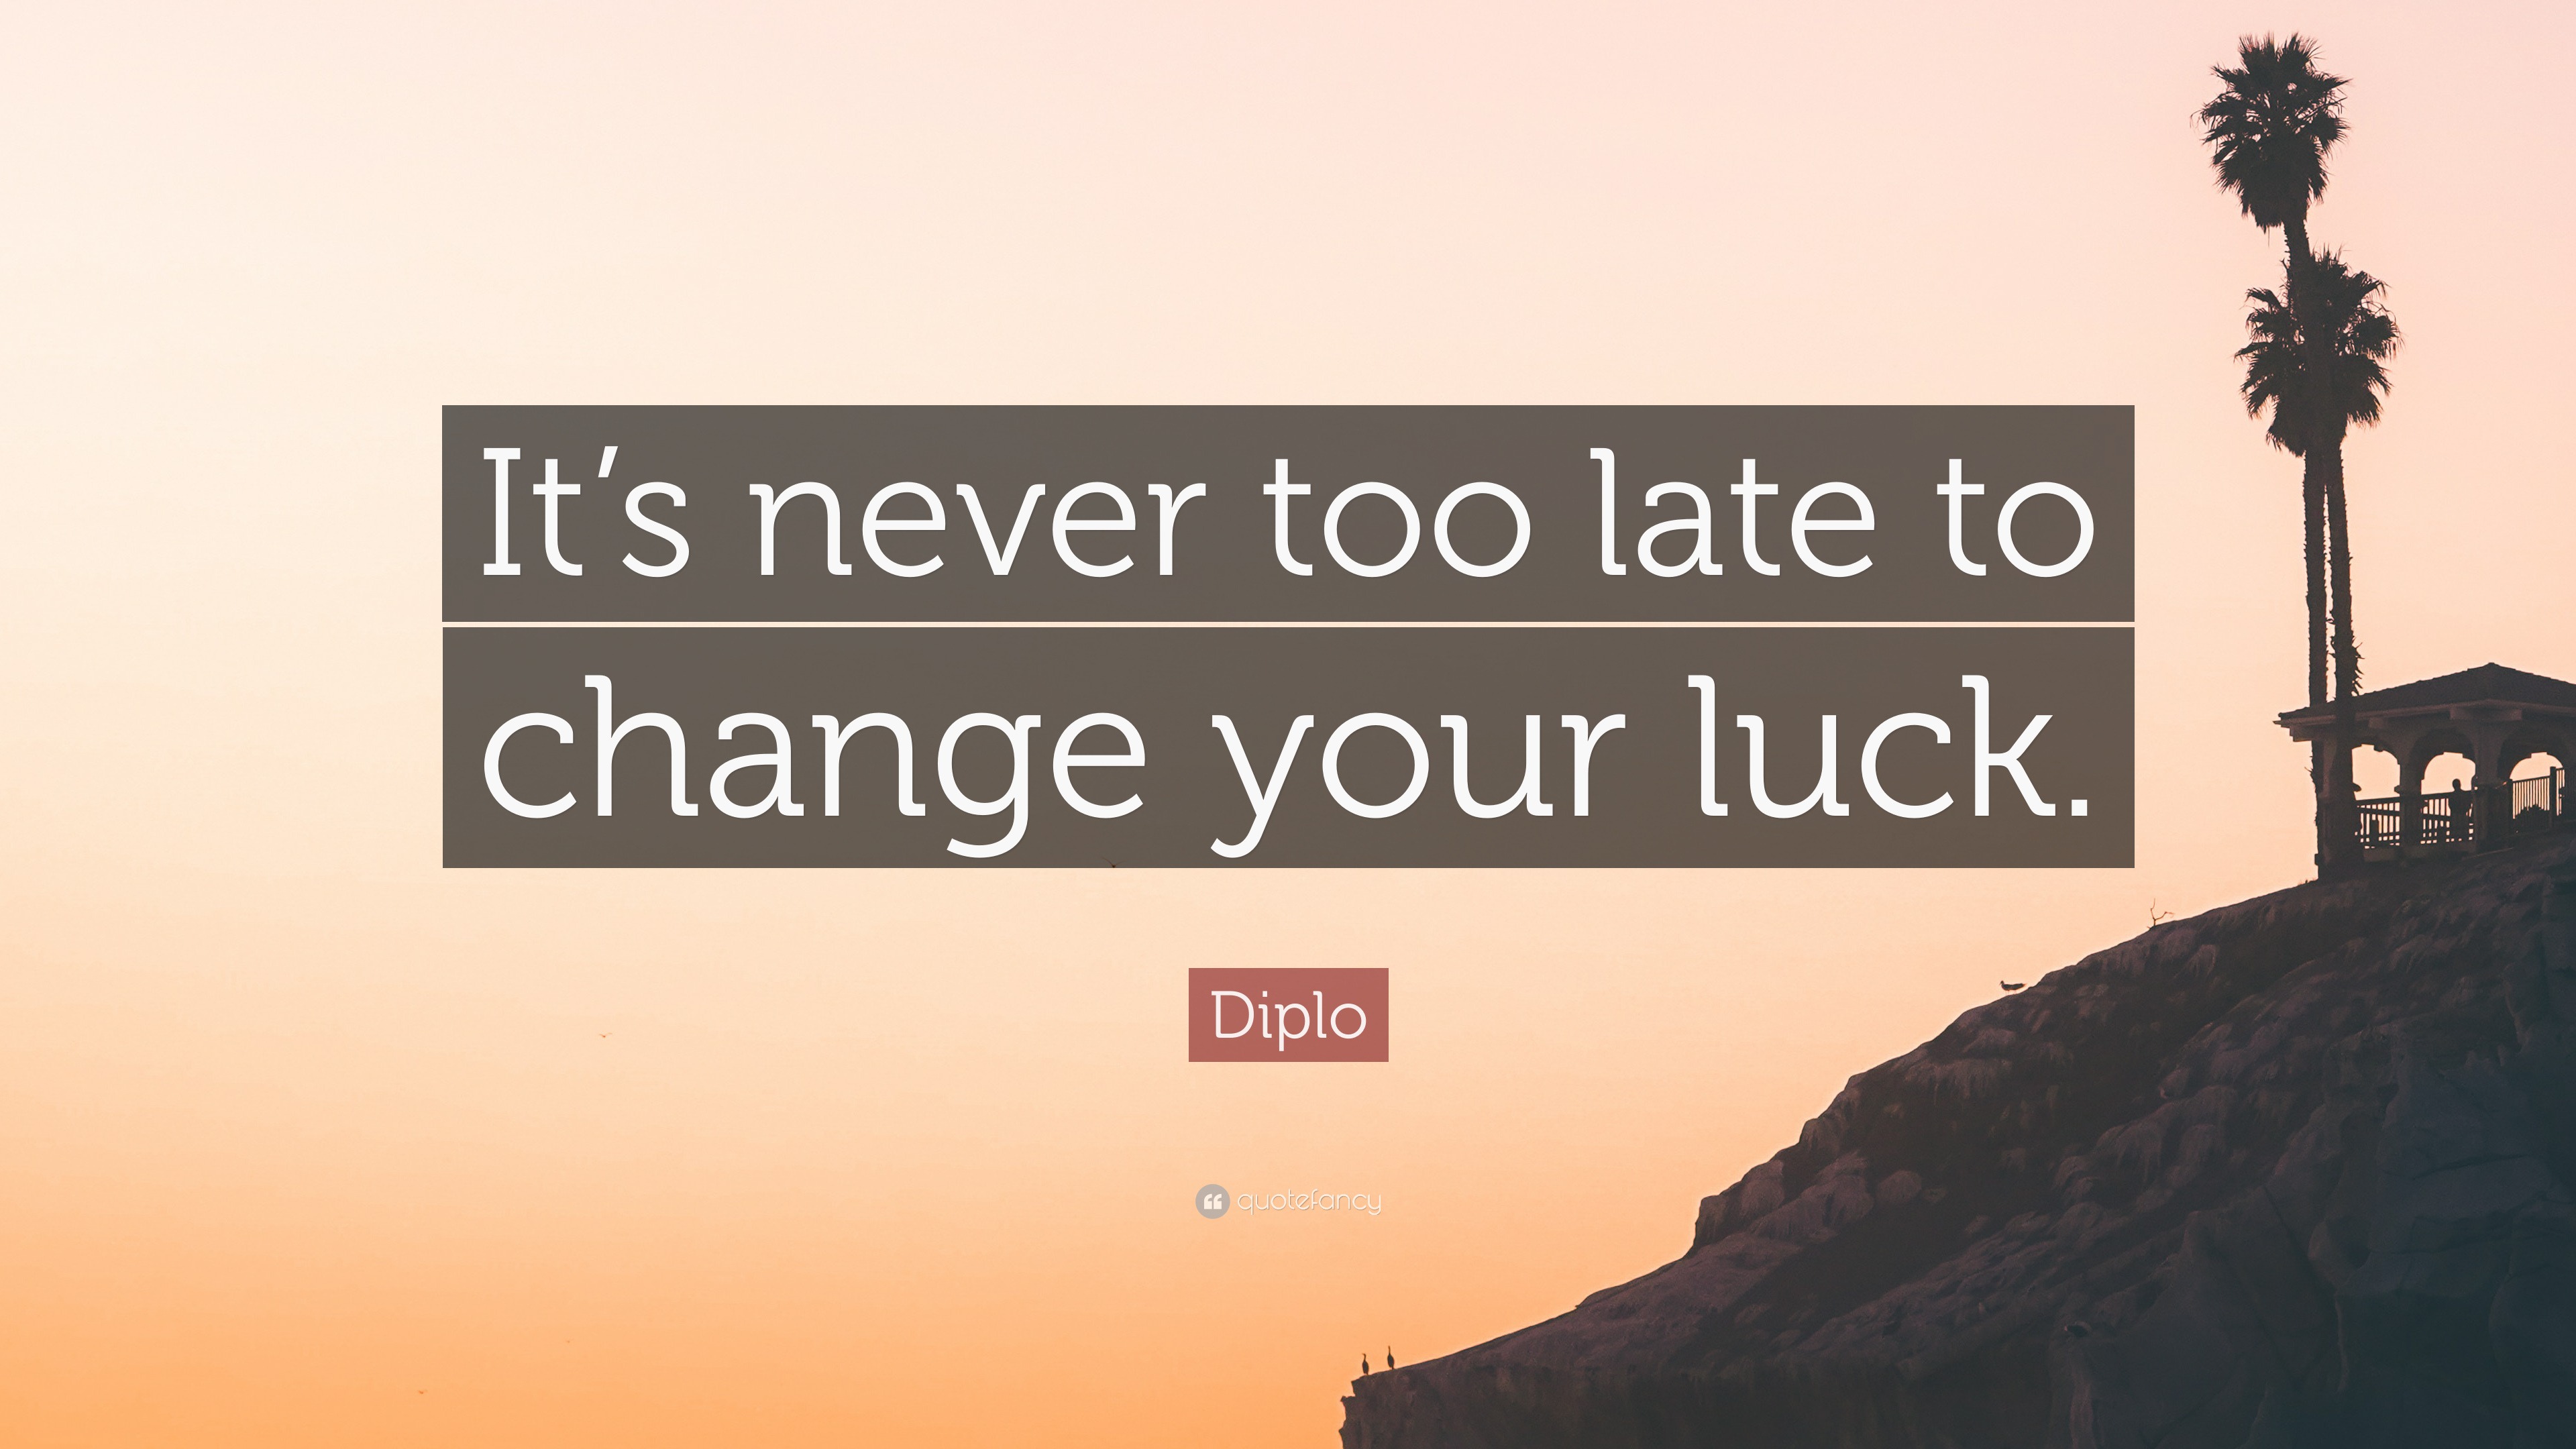 Diplo Quote: “It’s never too late to change your luck.”